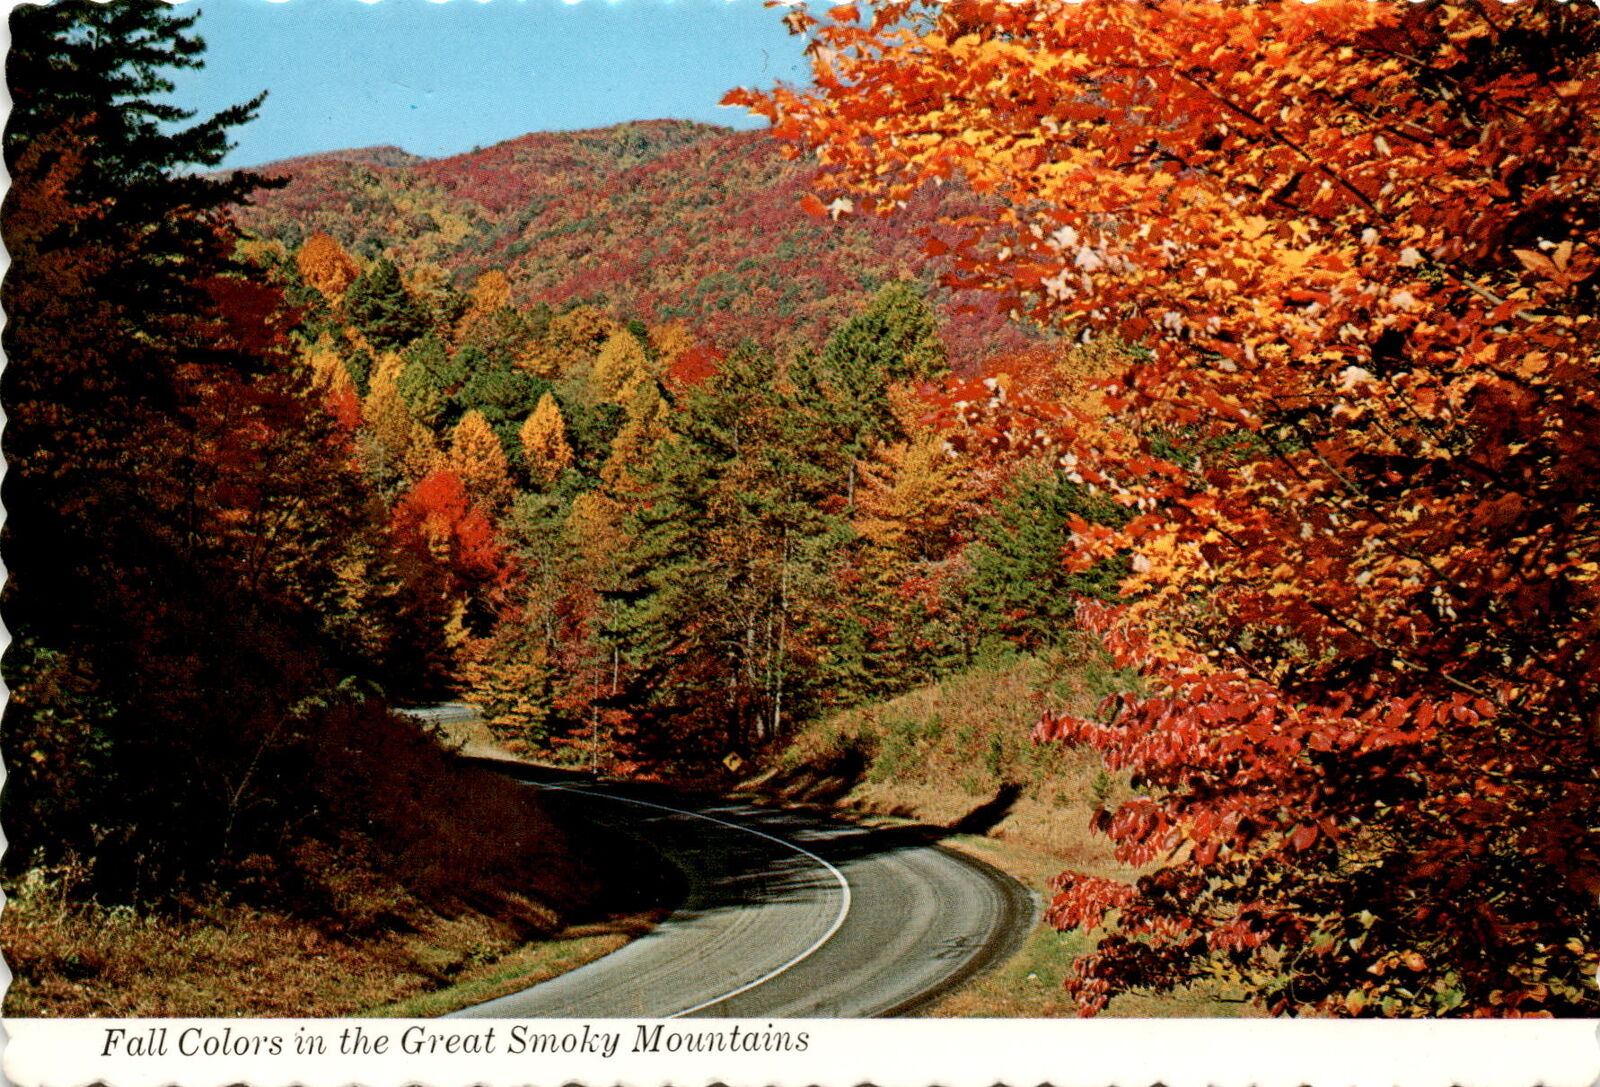 Vintage Fall Color Highway Scene Postcard - Great Smoky Mountains